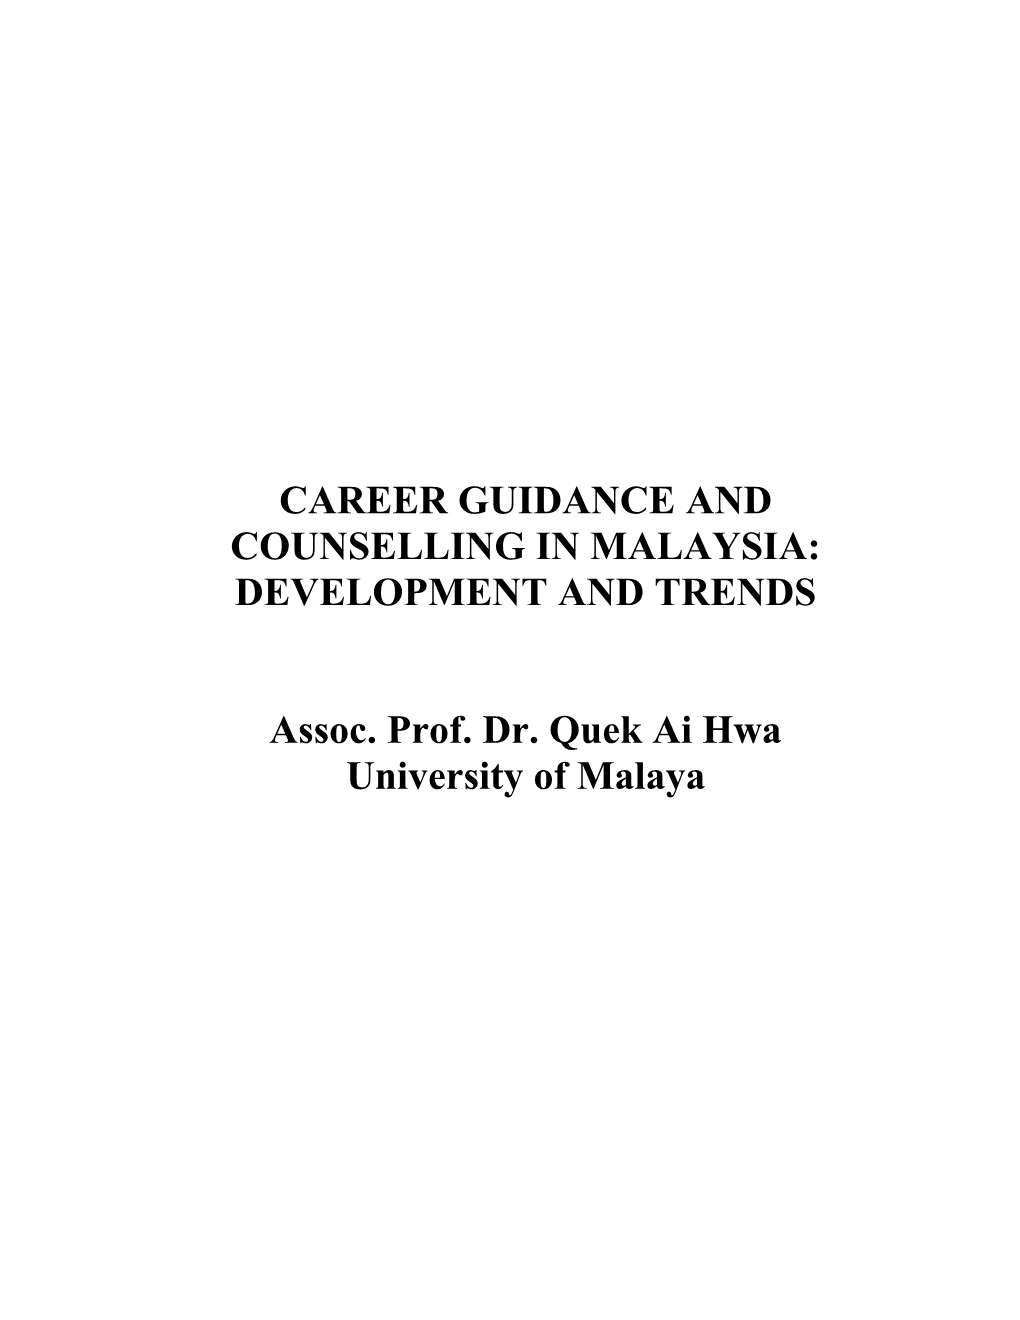 Career Guidance and Counselling in Malaysia